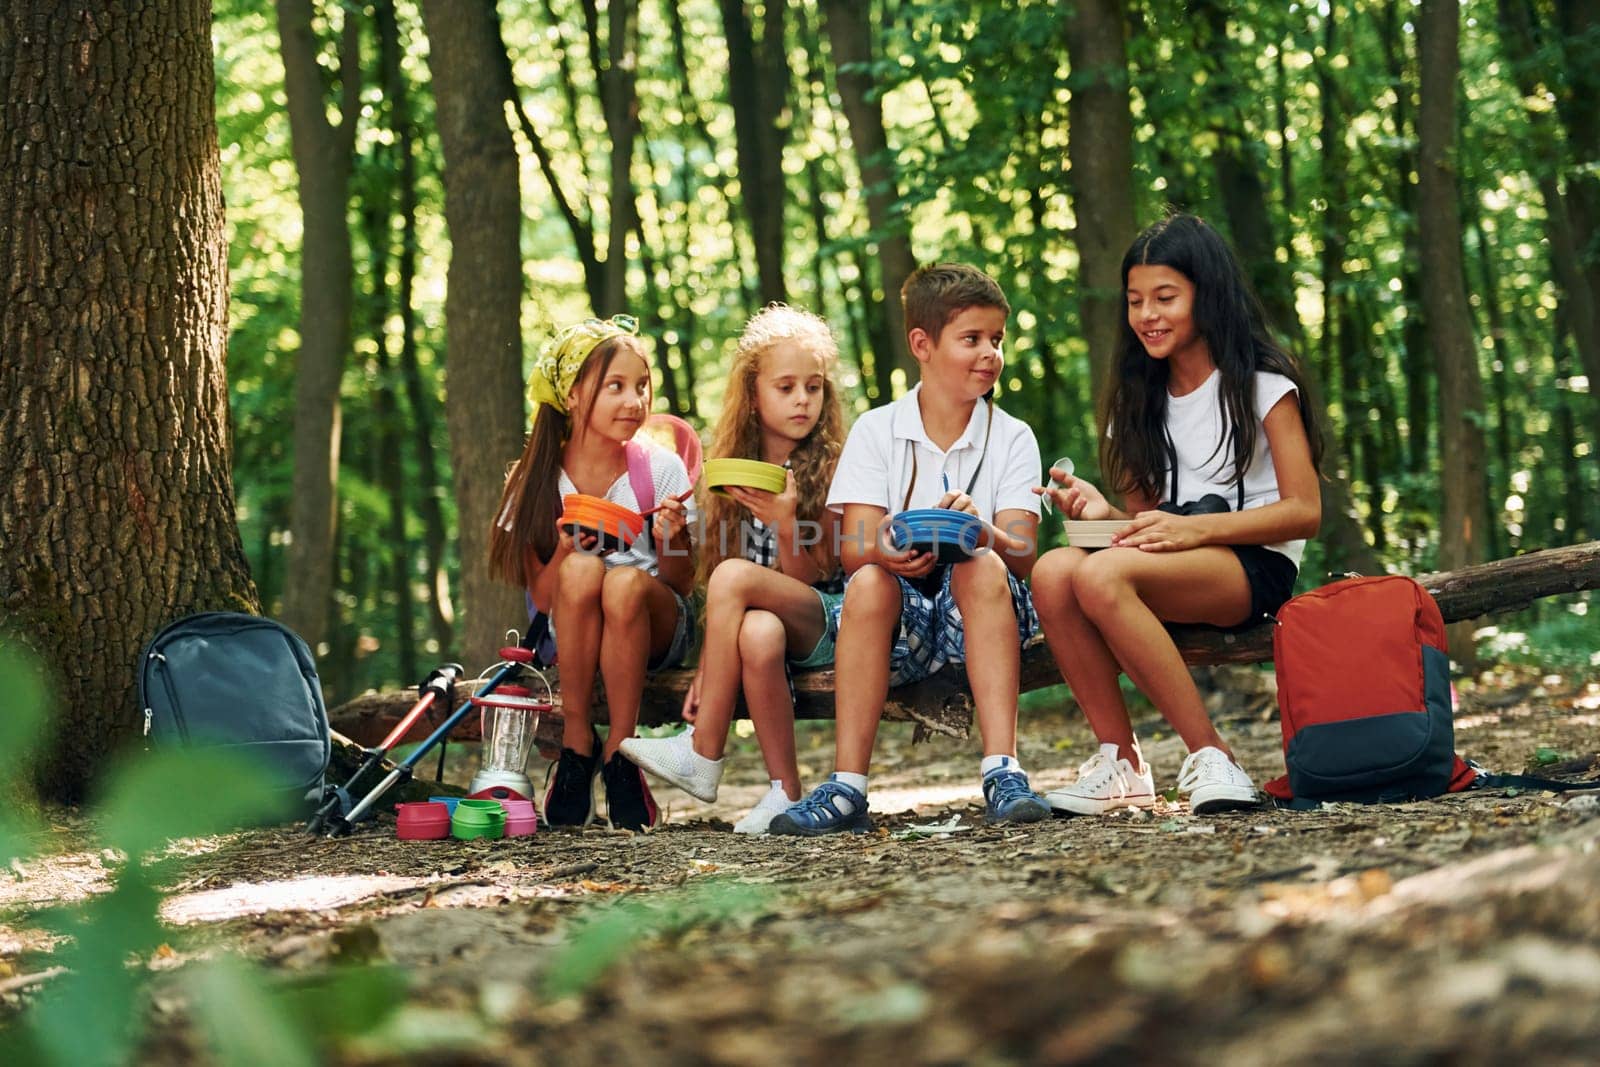 Sitting and having a rest. Kids strolling in the forest with travel equipment by Standret